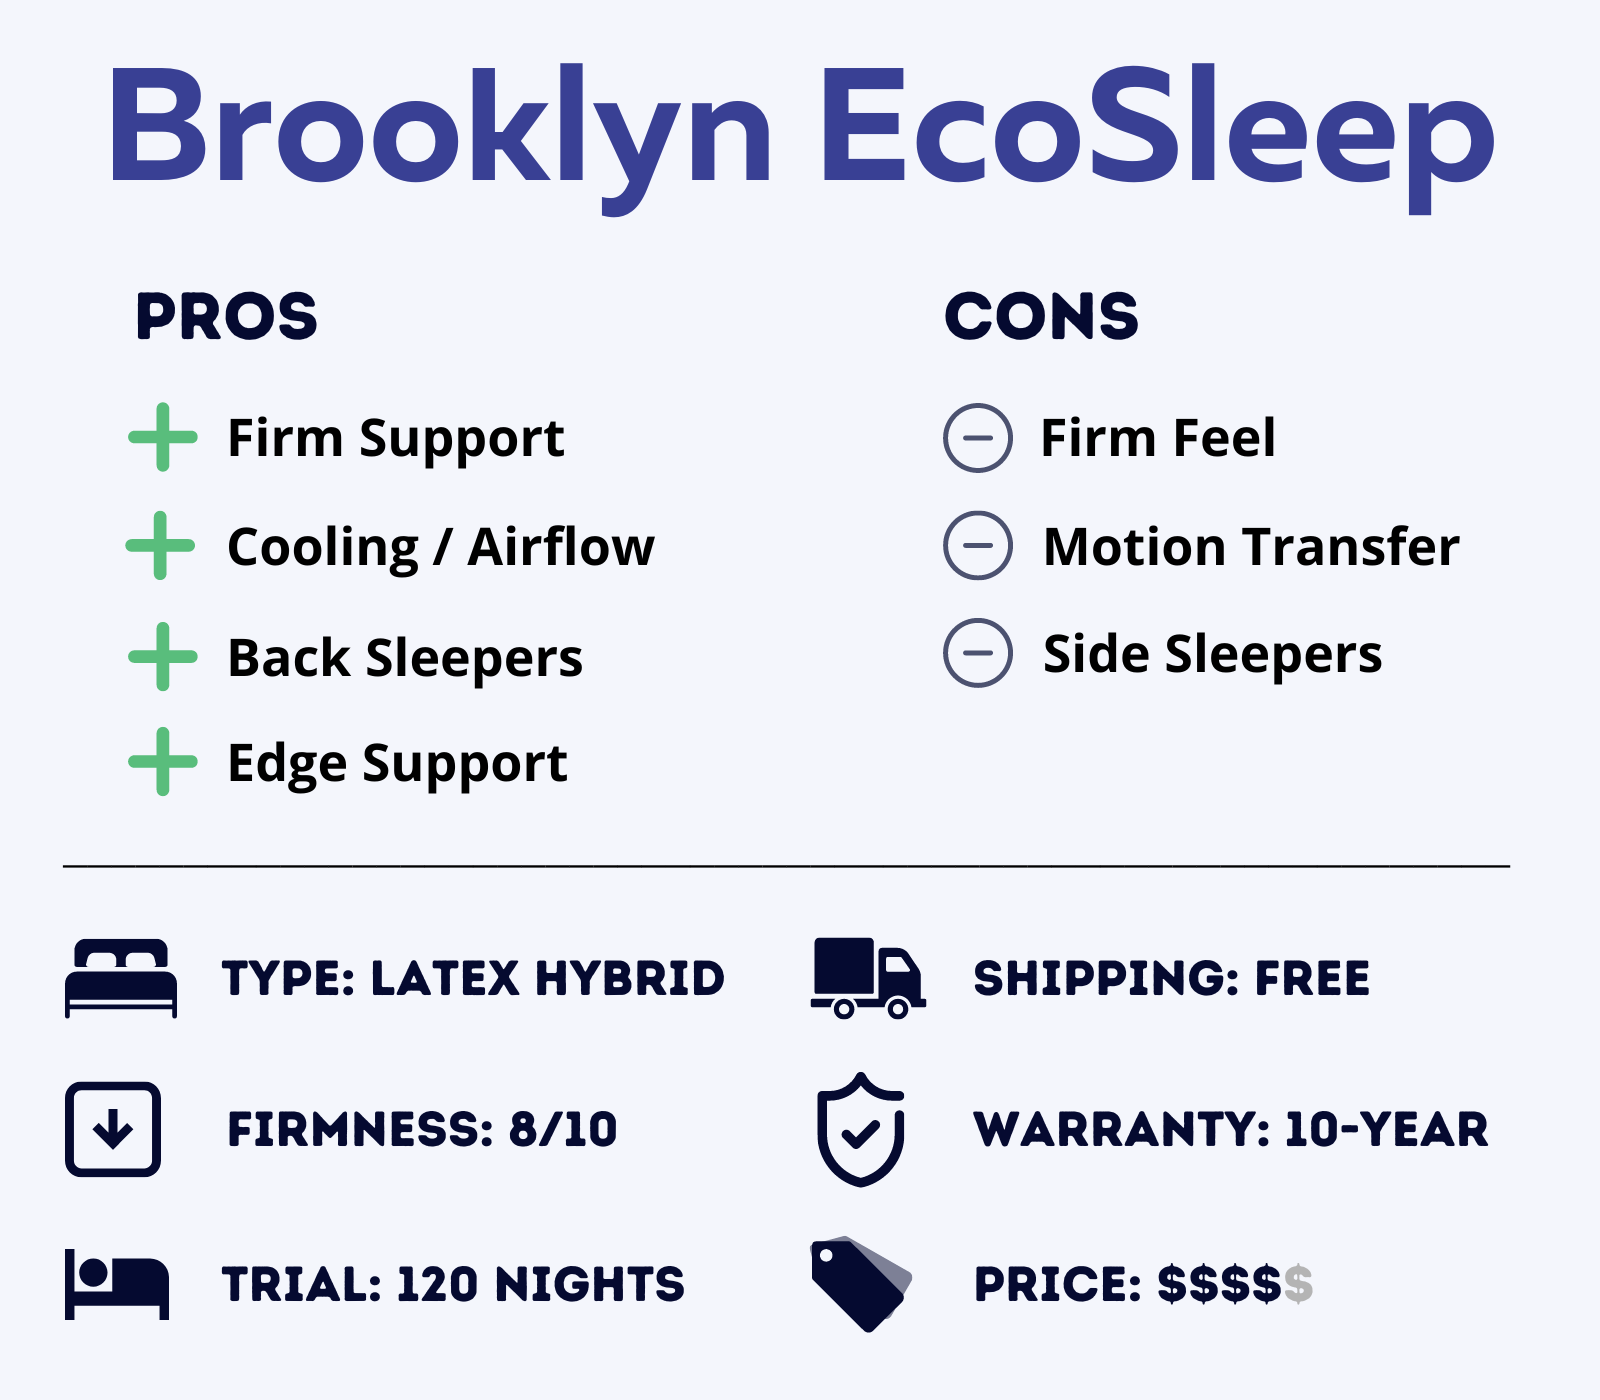 brooklyn bedding ecosleep overview, pros, and cons